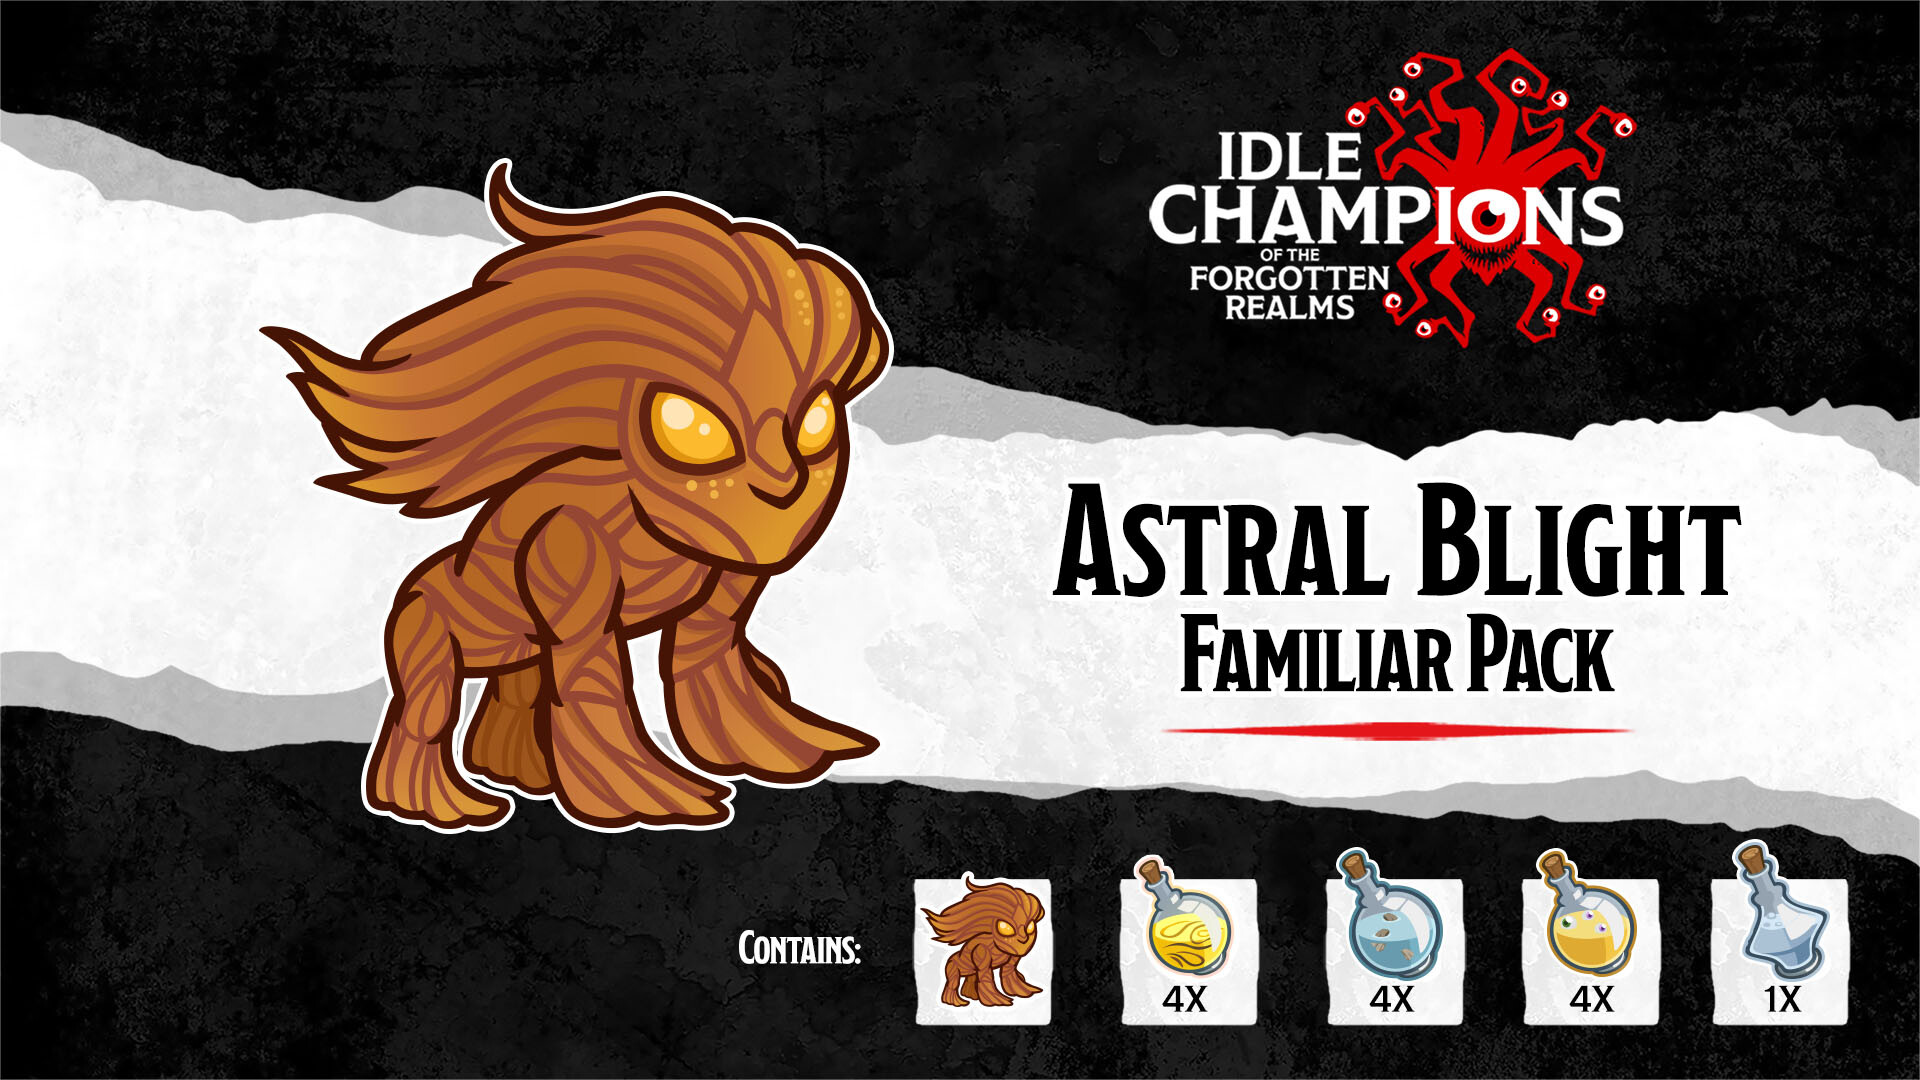 Idle Champions - Astral Blight Familiar Pack Featured Screenshot #1